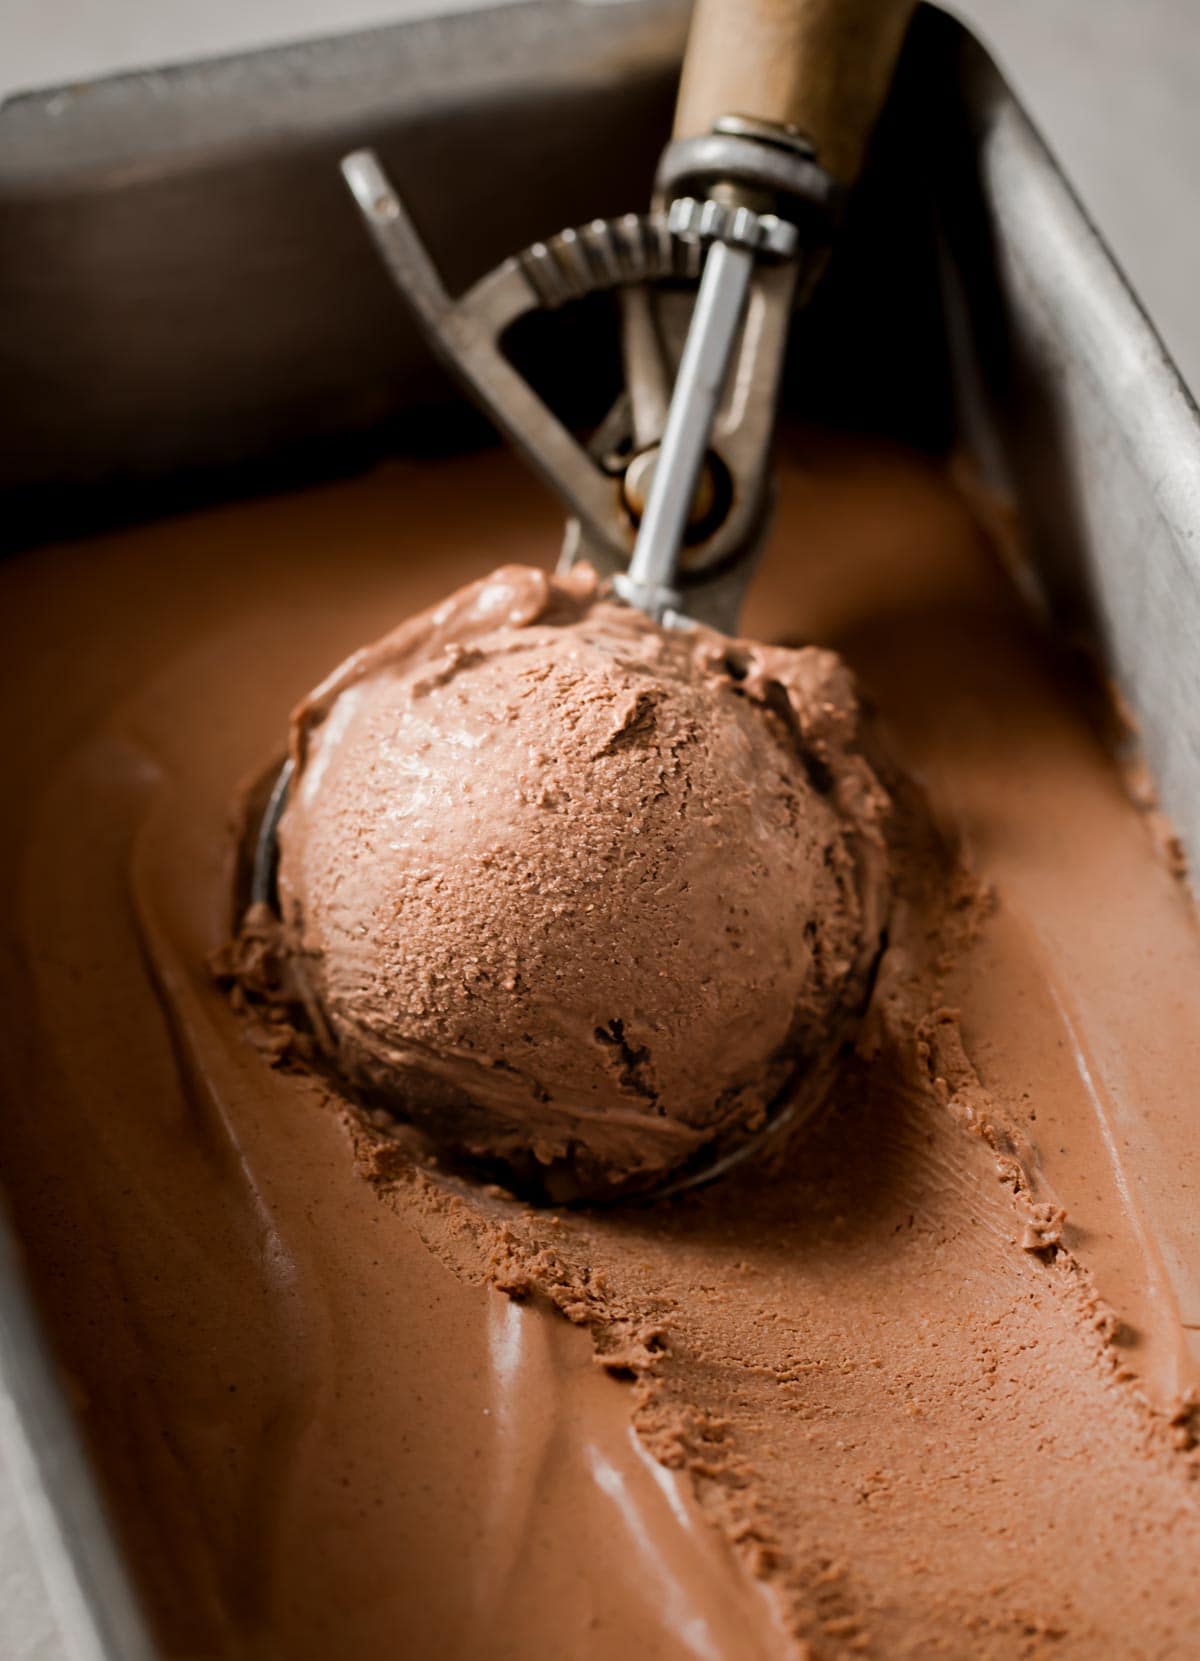 Chocolate low carb ice cream in a rectangular tin and a scoop of ice cream being scooped out